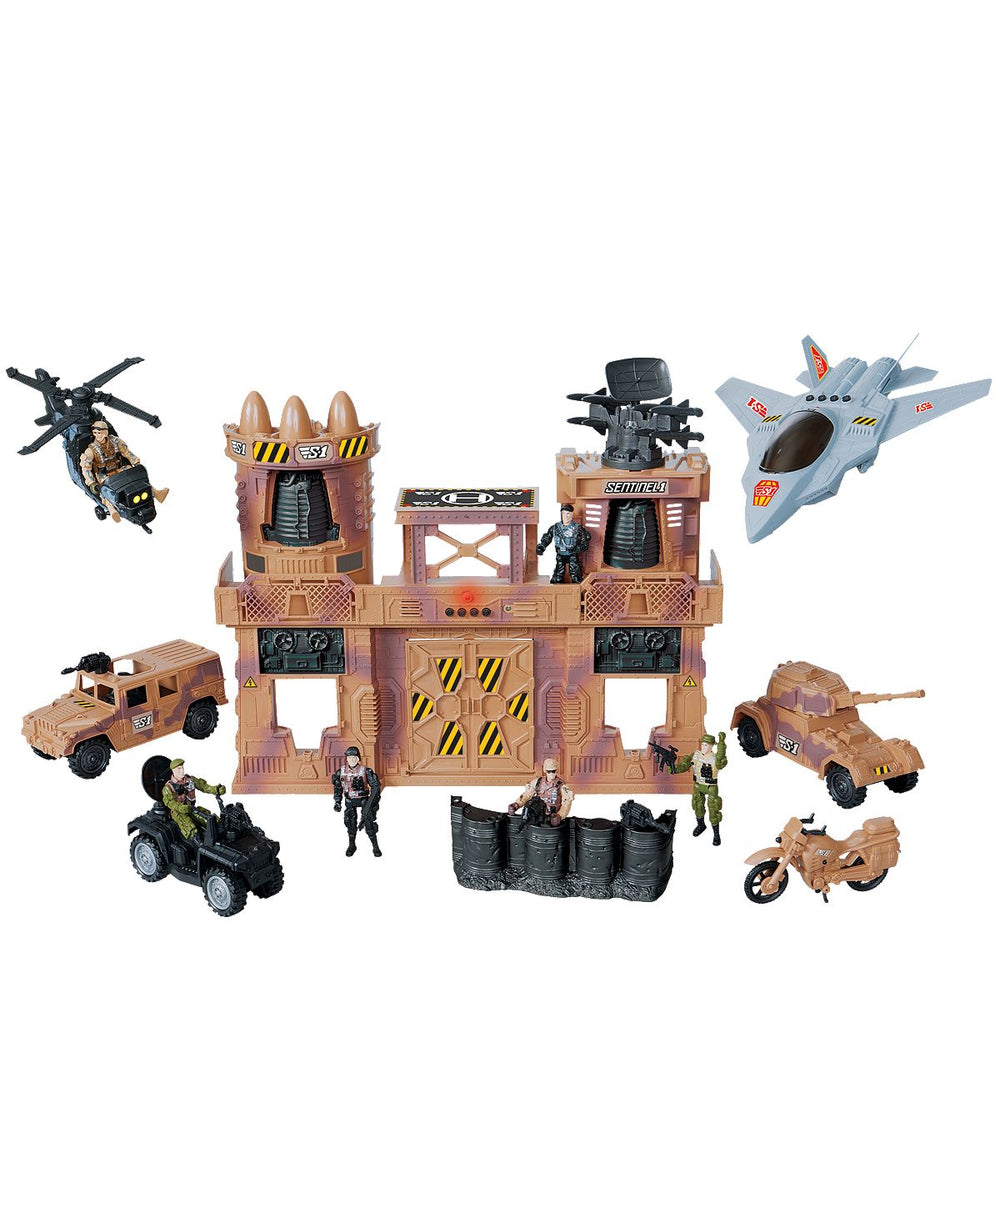 True Heroes Deluxe Military-Inspired Base Playset with Vehicles and Figures